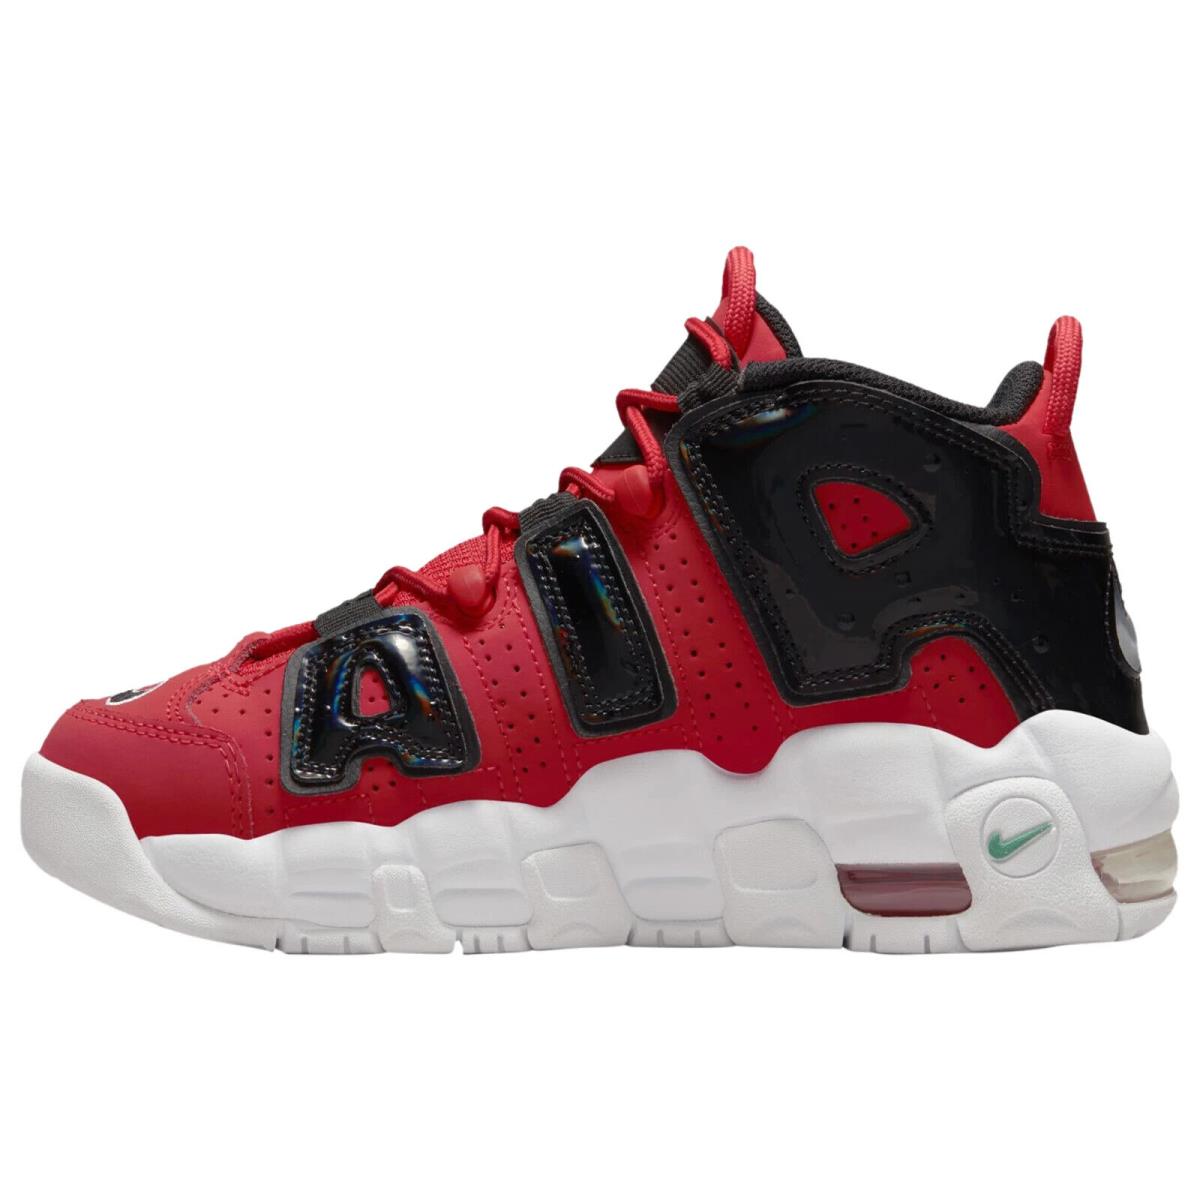 Nike Air More Uptempo GS Bred Black-university Red SZ 4.5Y DM3190-001 - Red